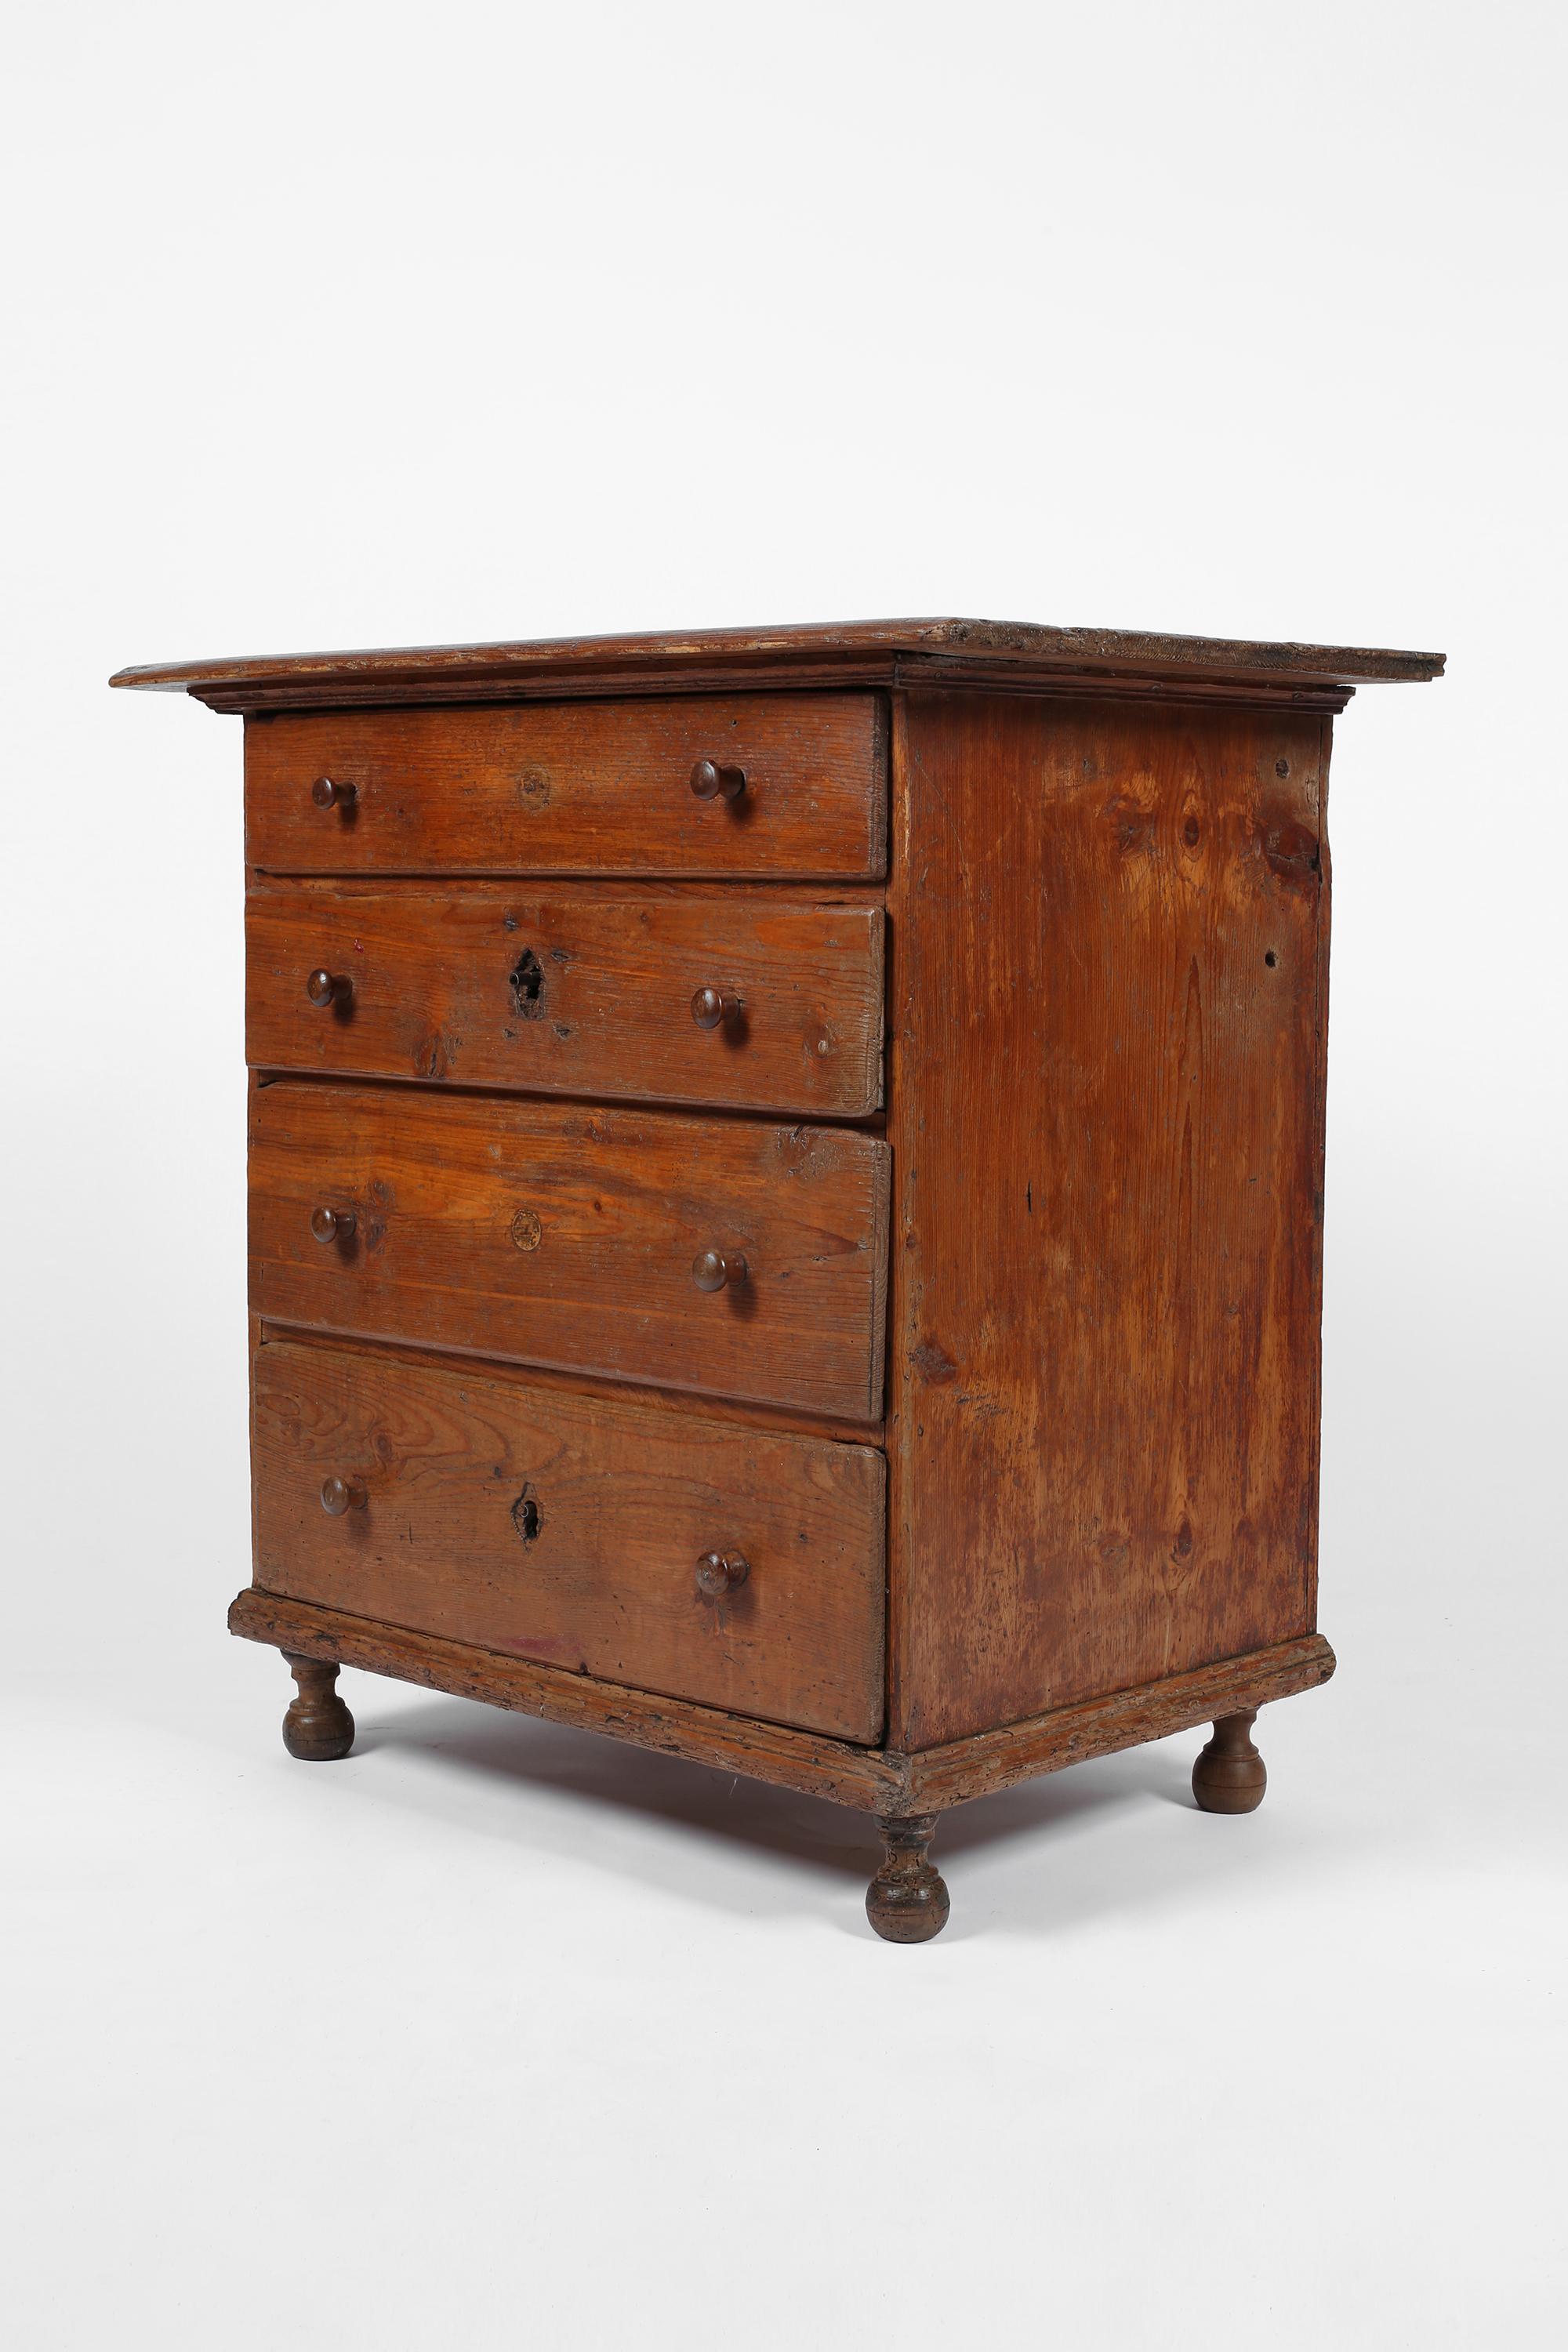 Early 18th Century Italian Chest of Draws in Pine and Elm - Veneto, circa 1700 For Sale 3